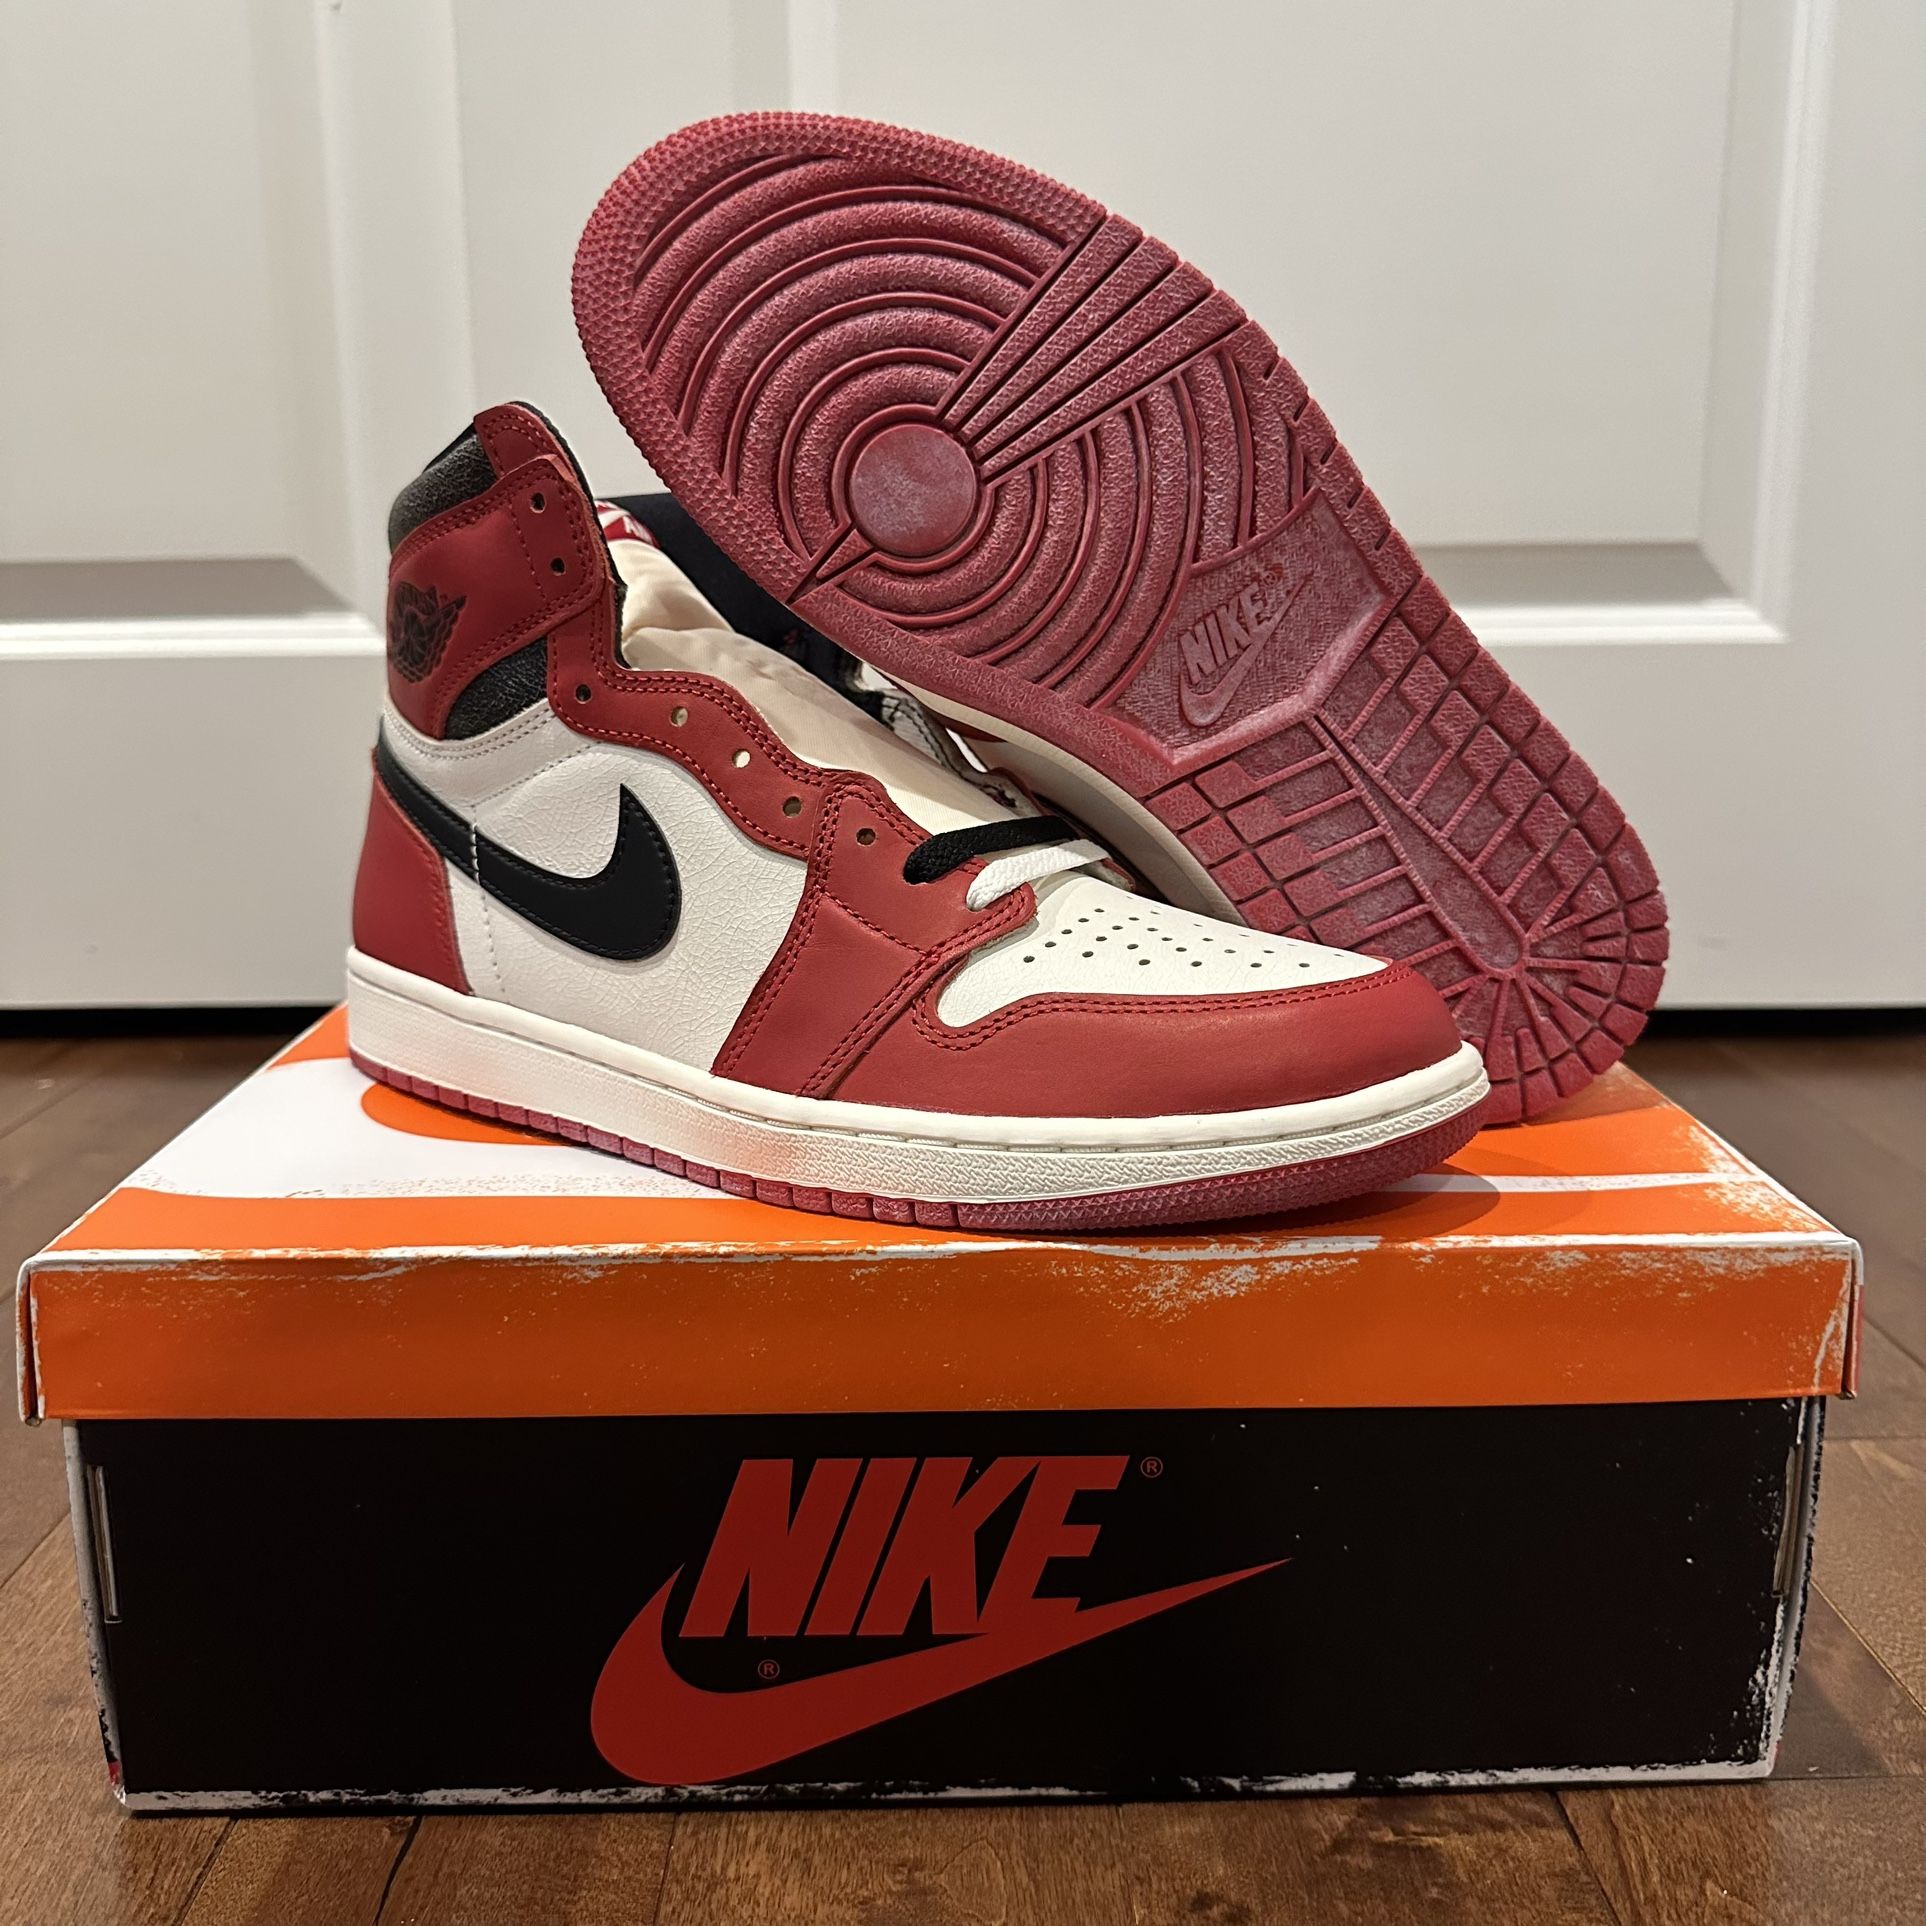 *NEW!* Nike Air Jordan 1 “Lost and Found” - Size 10M